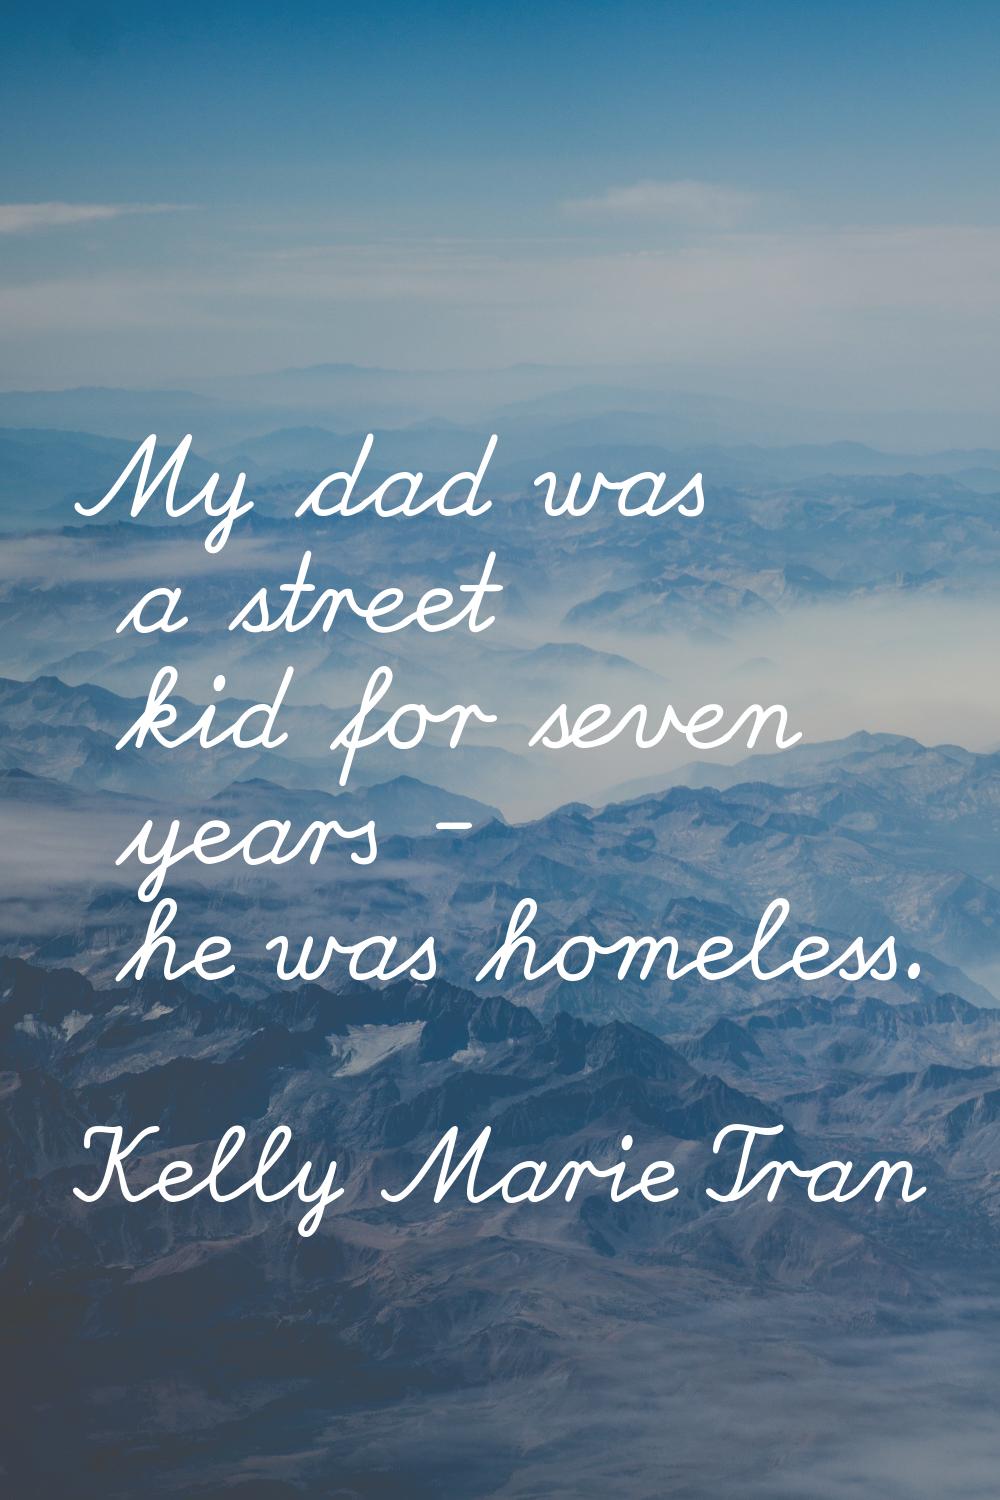 My dad was a street kid for seven years - he was homeless.